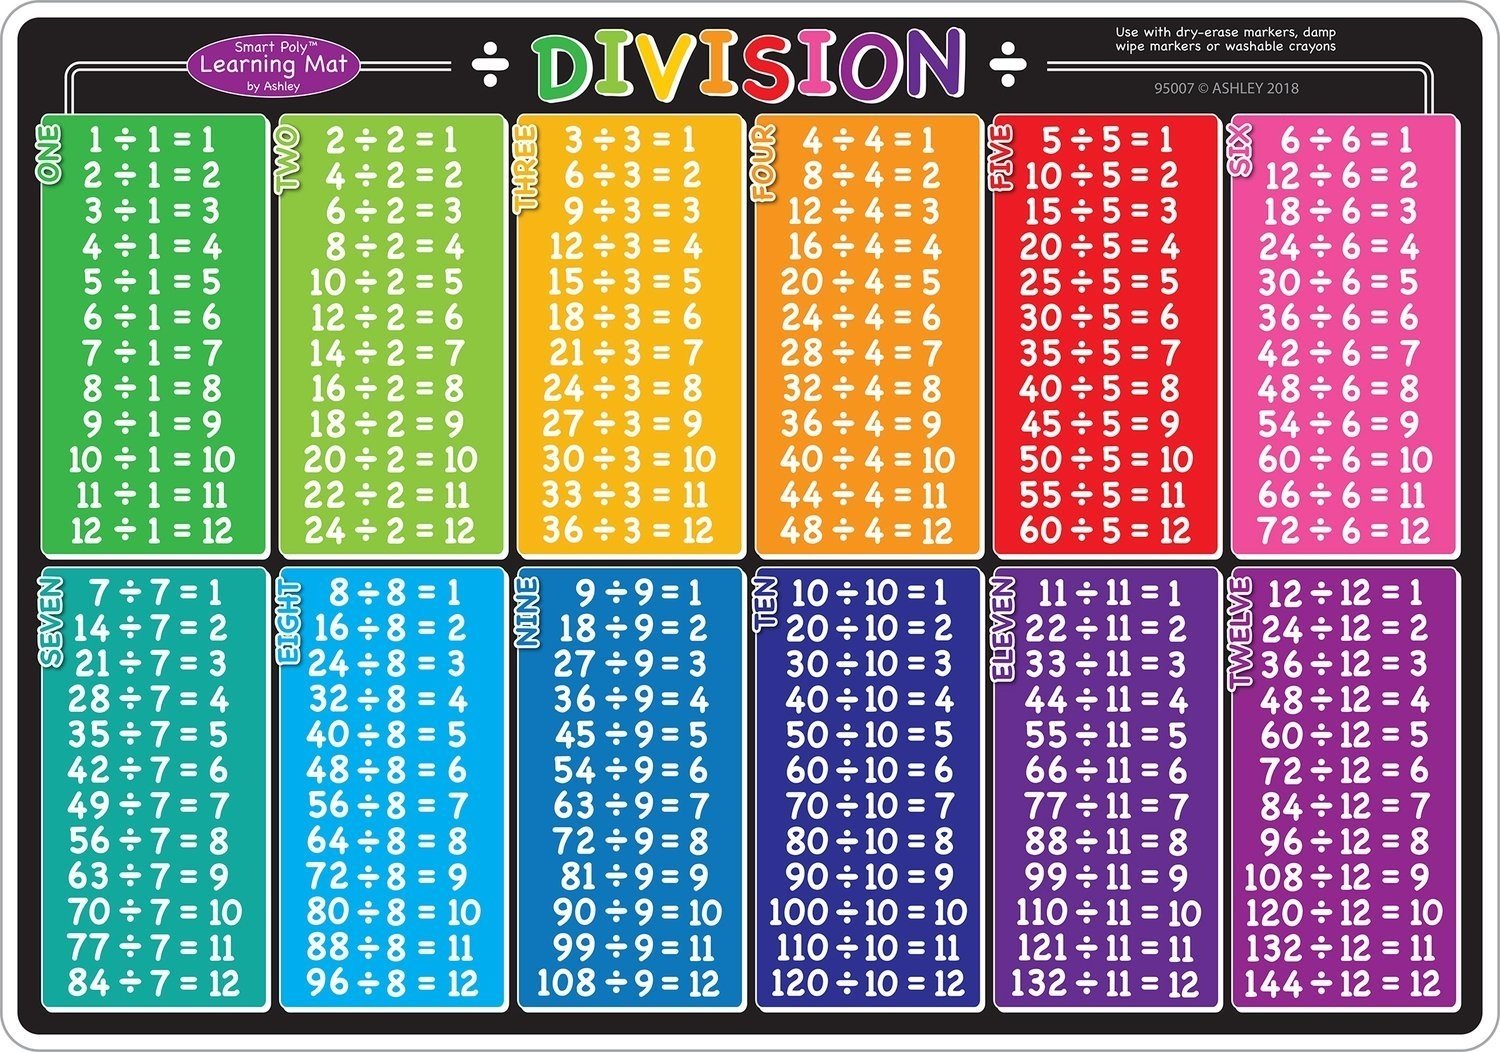 division-tables-1-12-practice-sheet-times-tables-worksheets-division-tables-1-12-practice